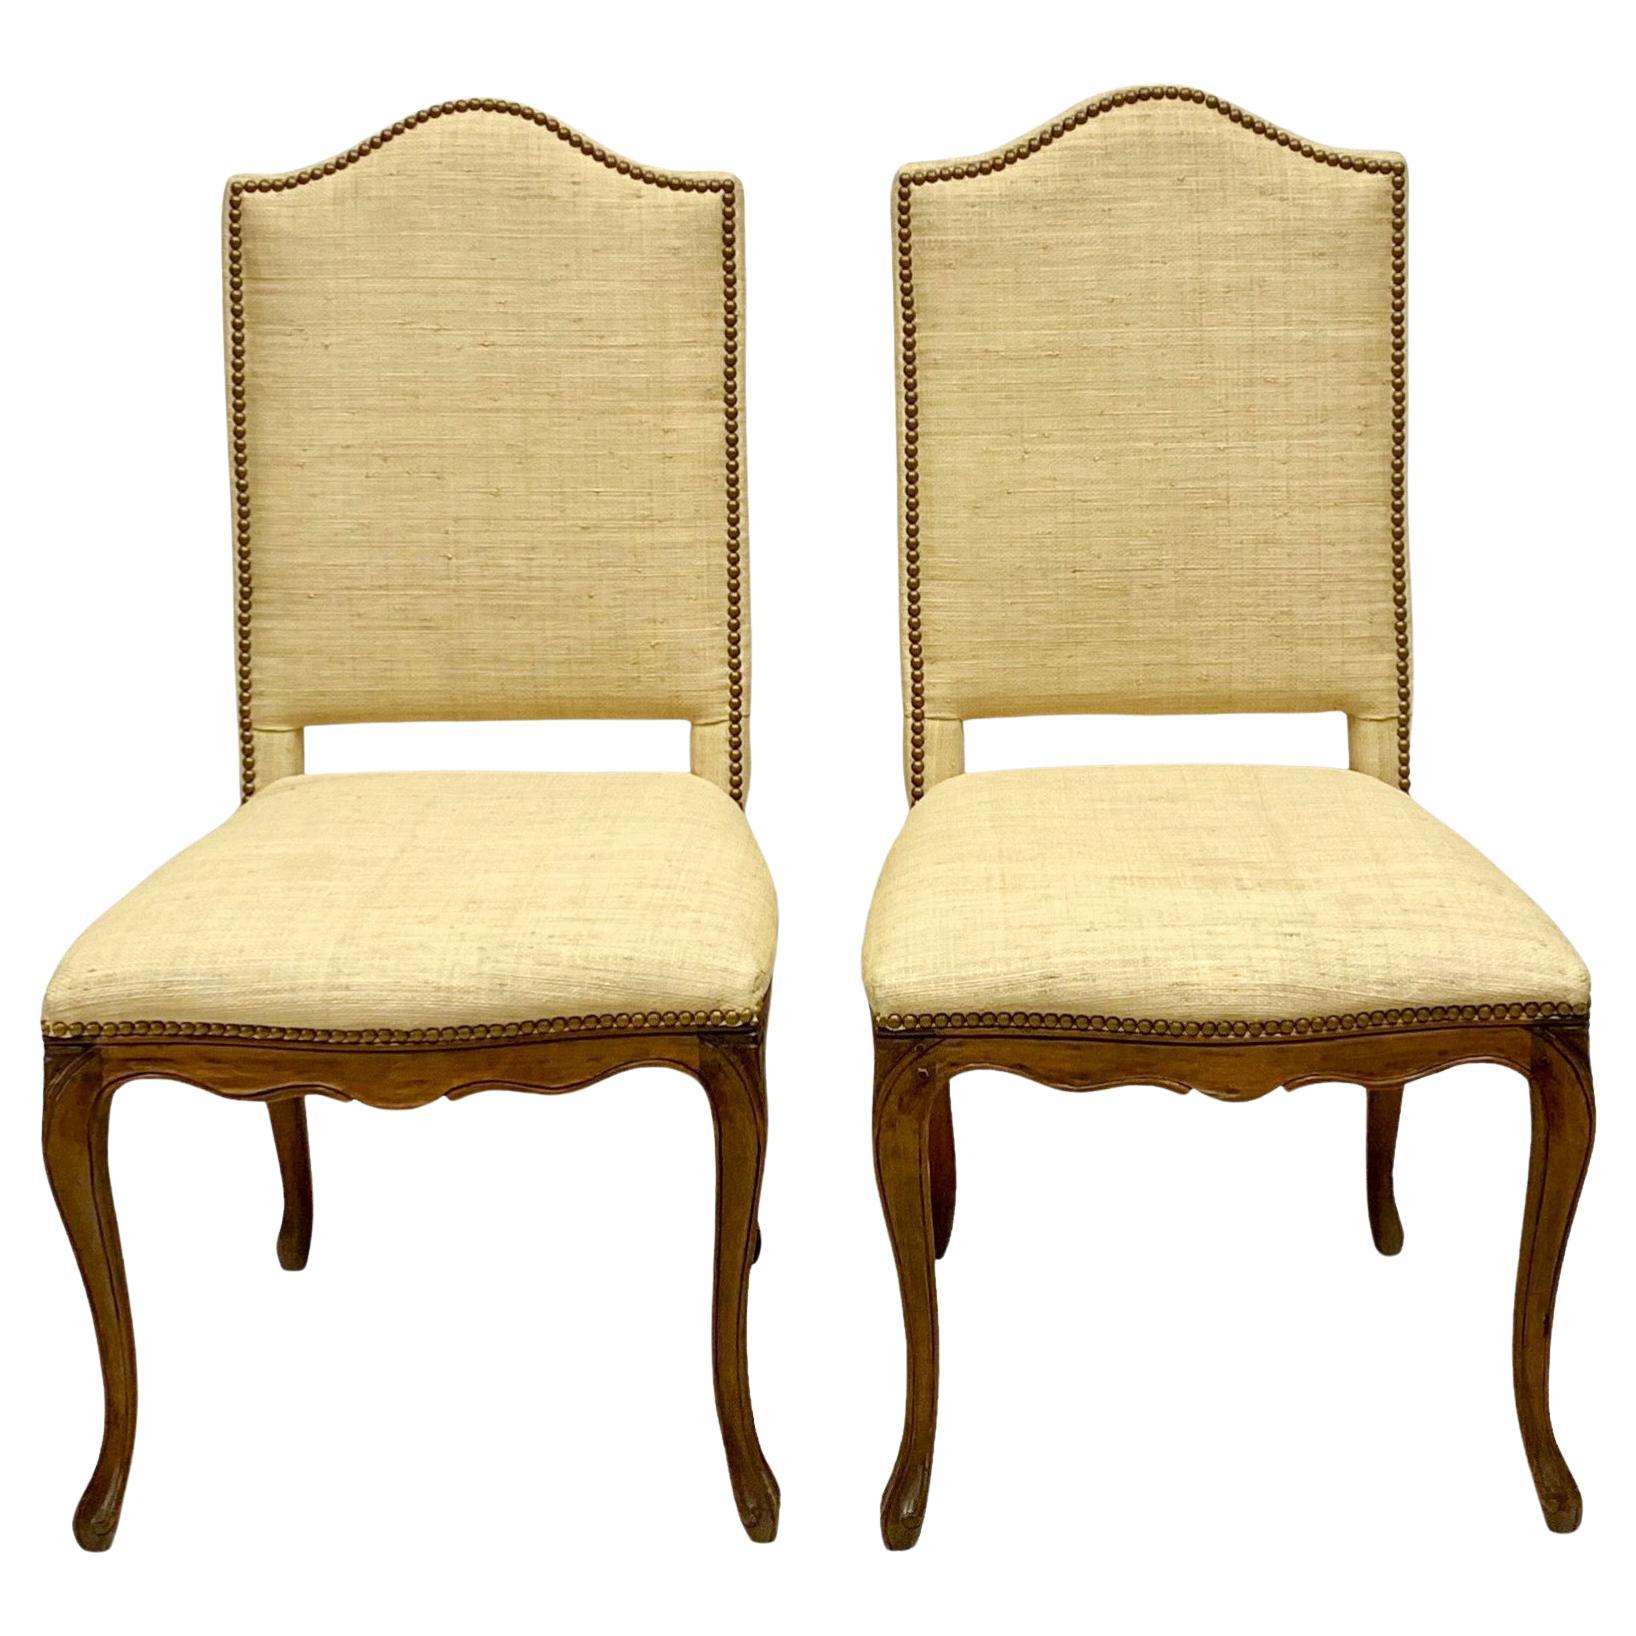 Louis XV Style French Style Side Chairs In Grasscloth W/ Brass Nailheads -Pair For Sale